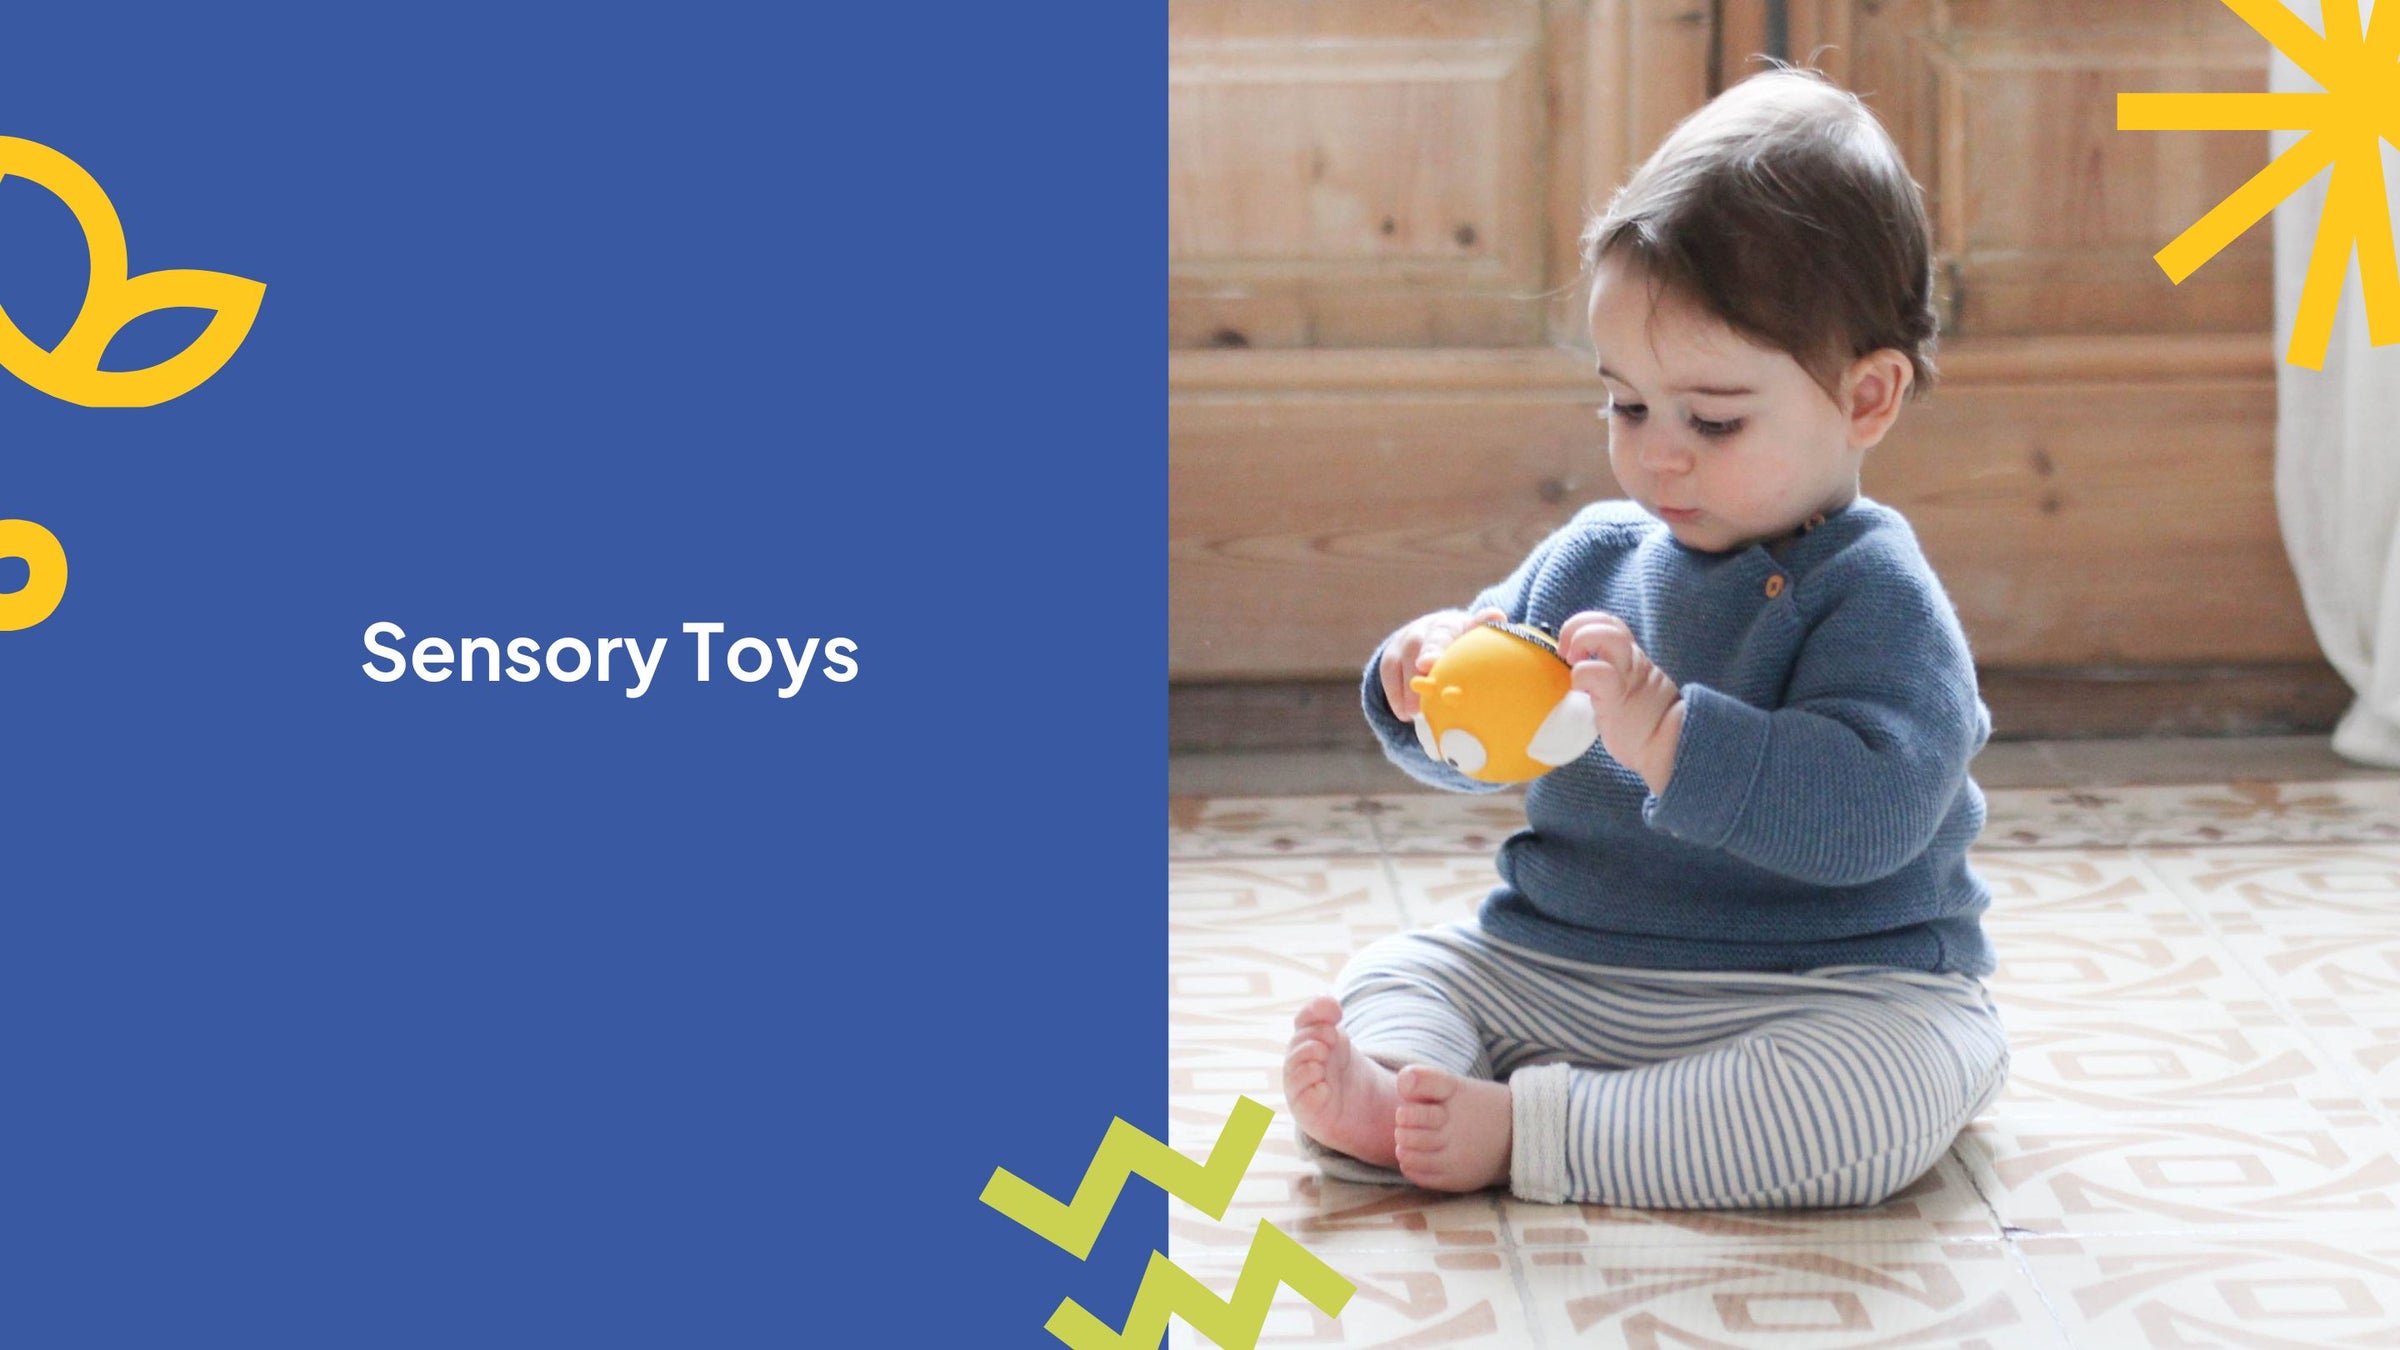 smallkind sensory toys collection - baby sitting up playing with a yellow rubber bee toy